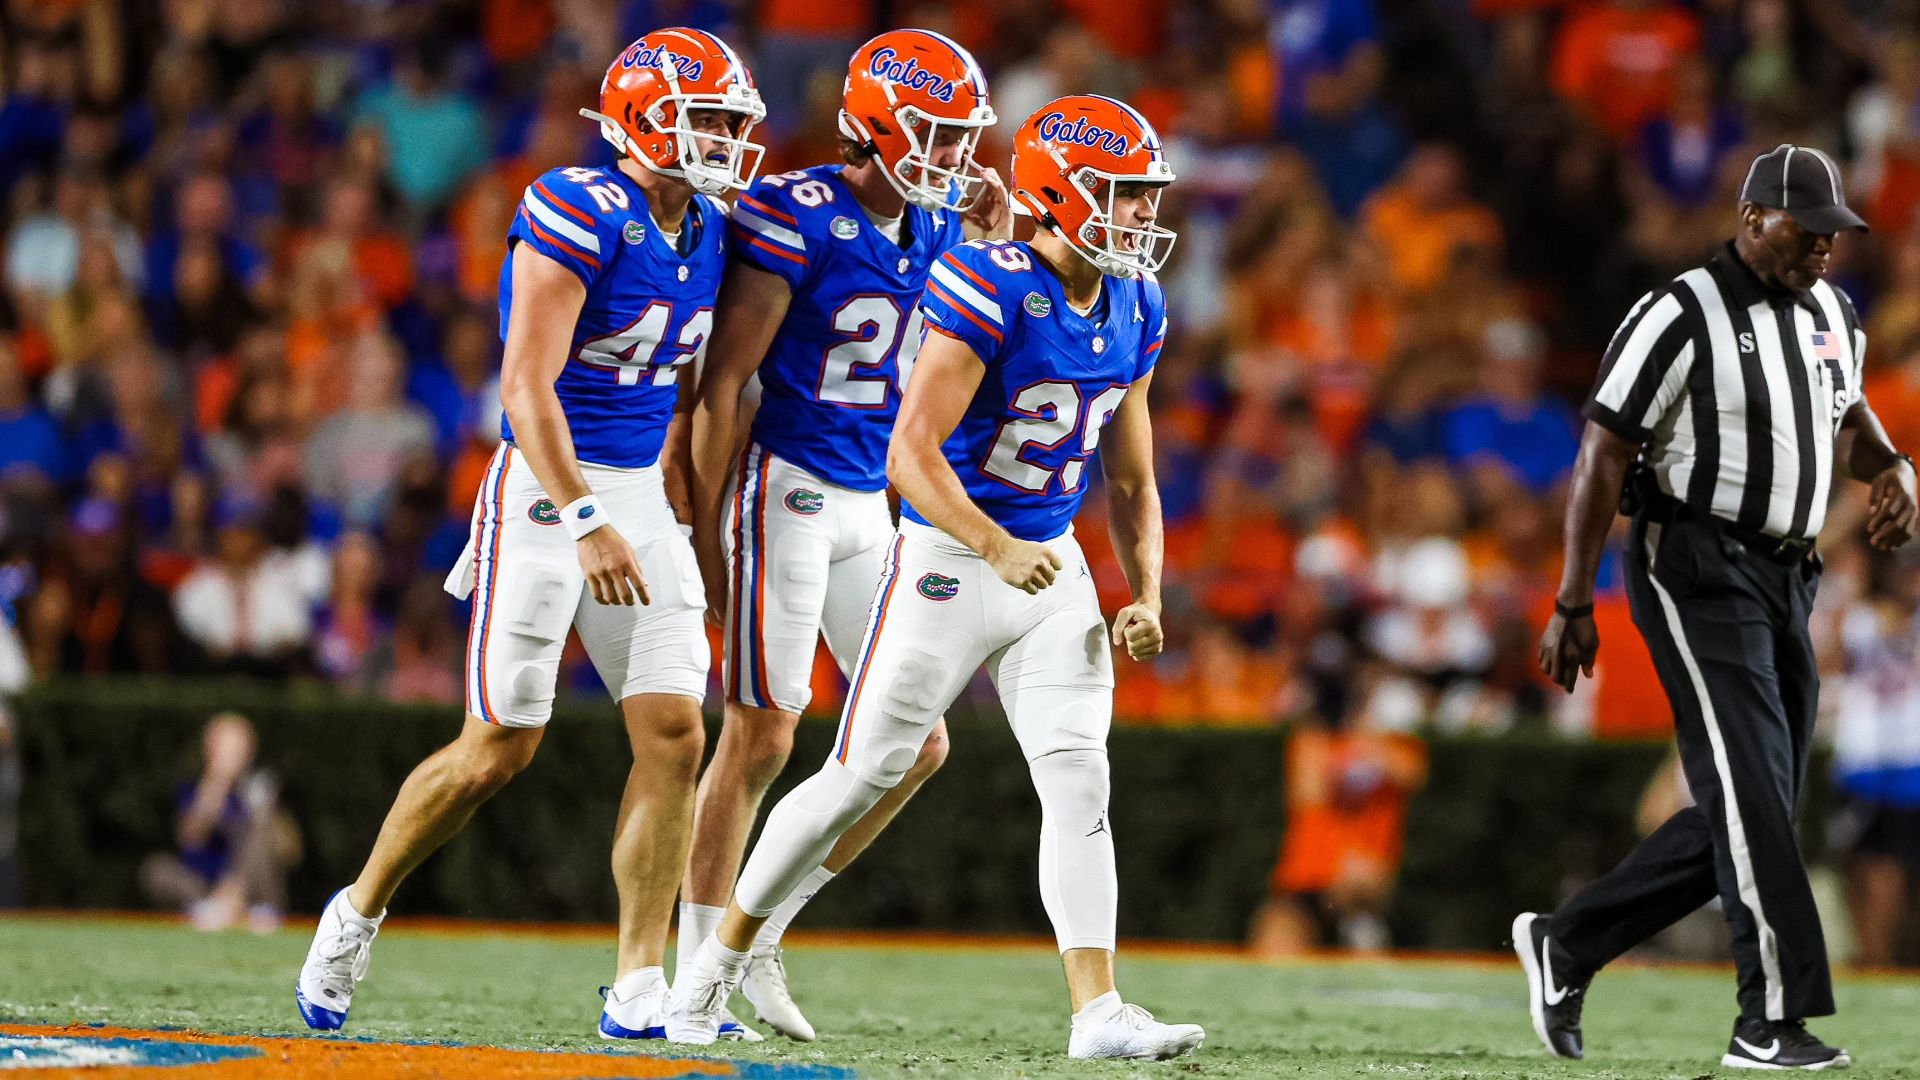 Smack leads No. 25 Florida to victory over Charlotte